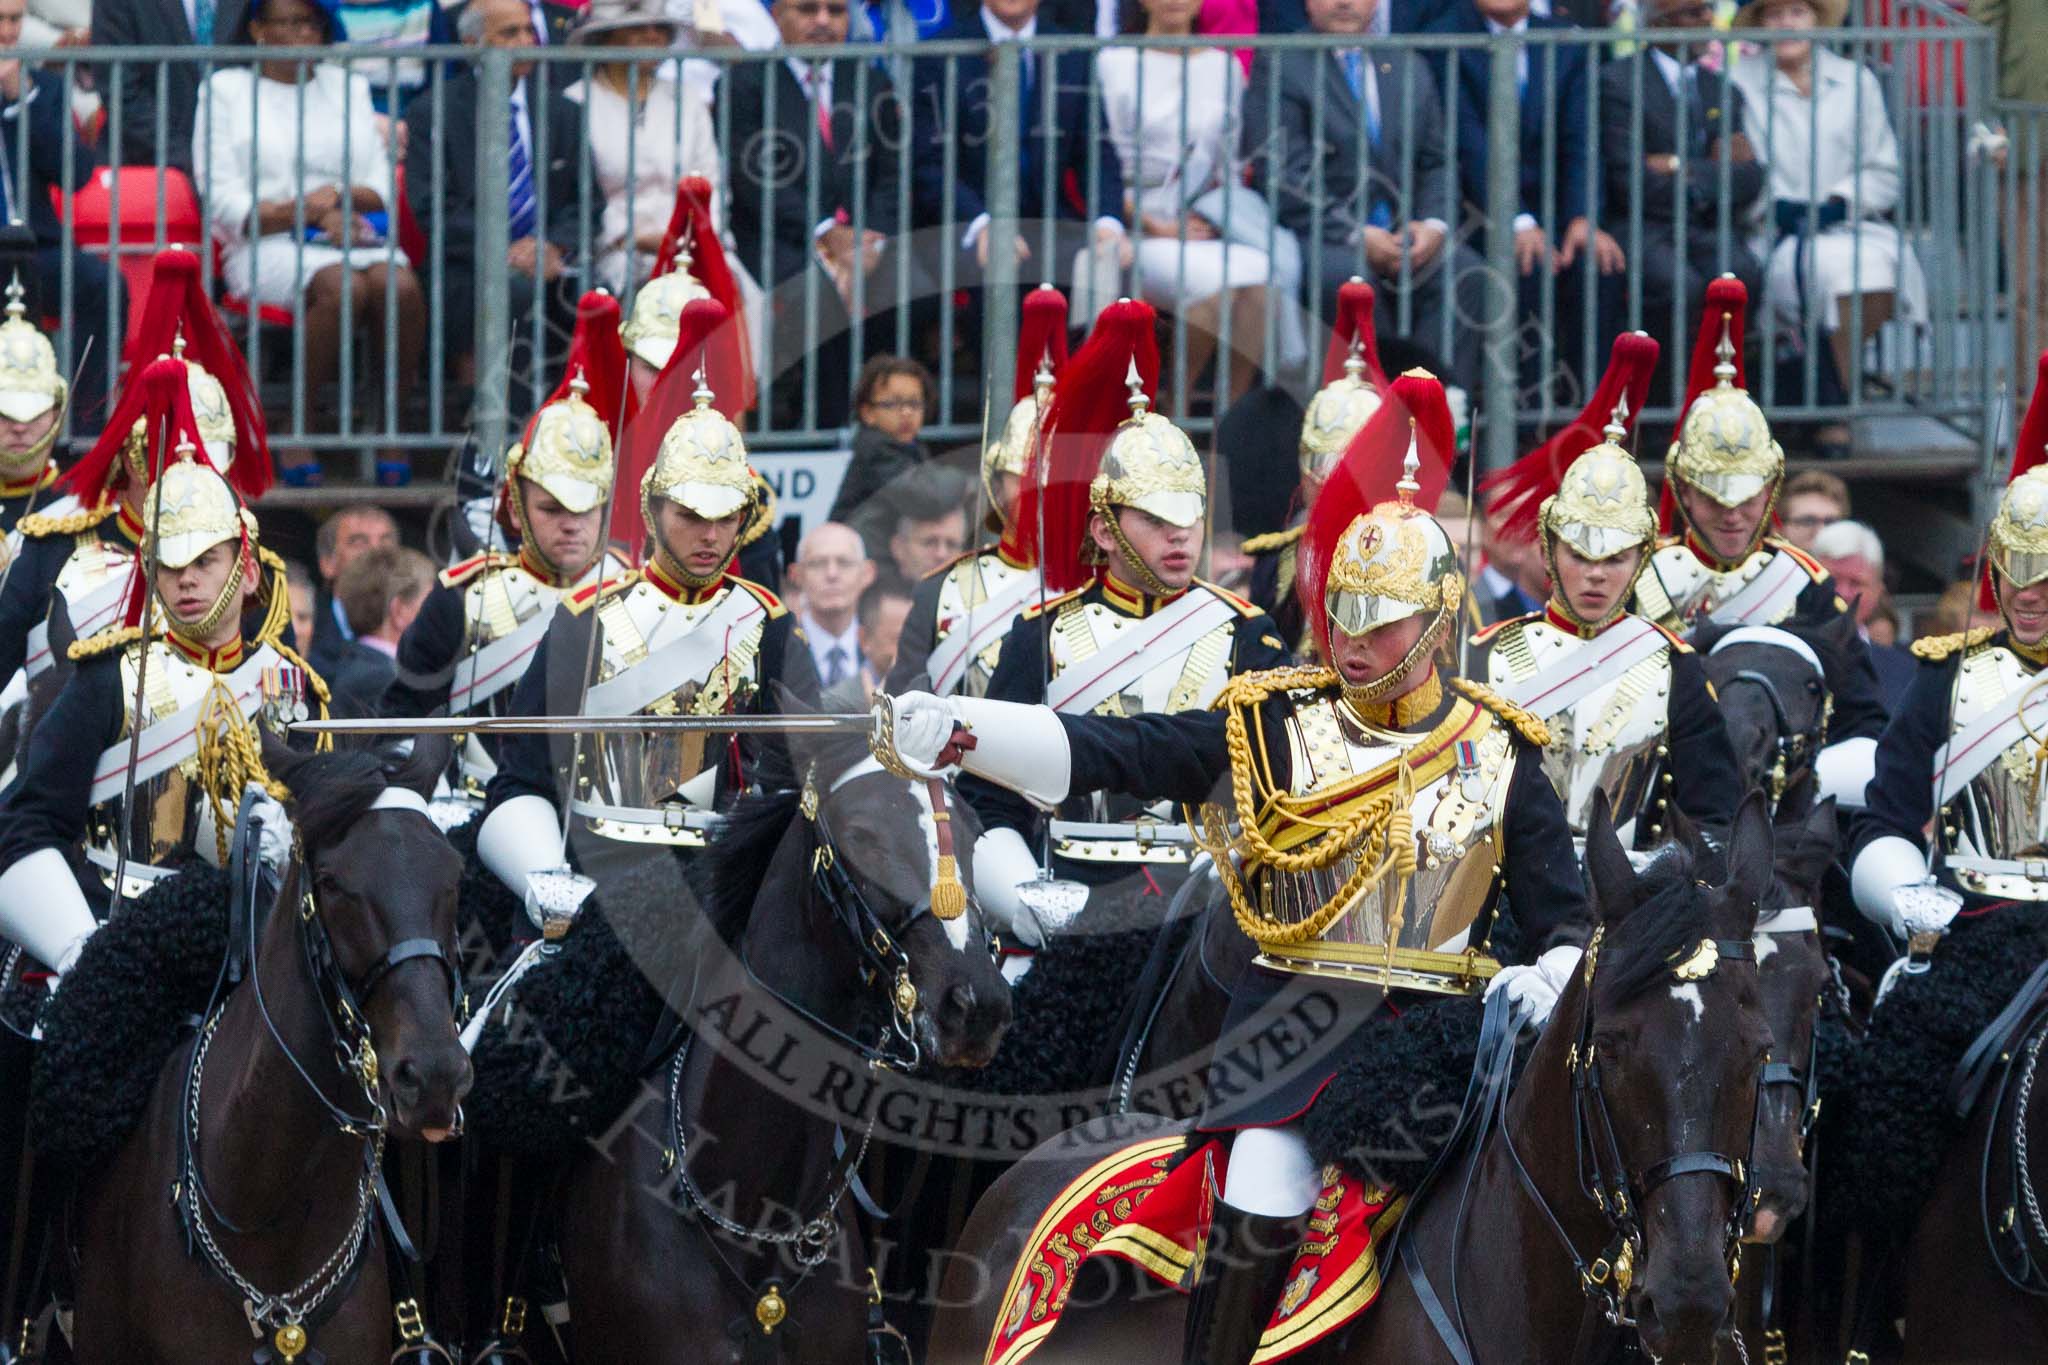 Trooping the Colour 2015. Image #603, 13 June 2015 11:58 Horse Guards Parade, London, UK